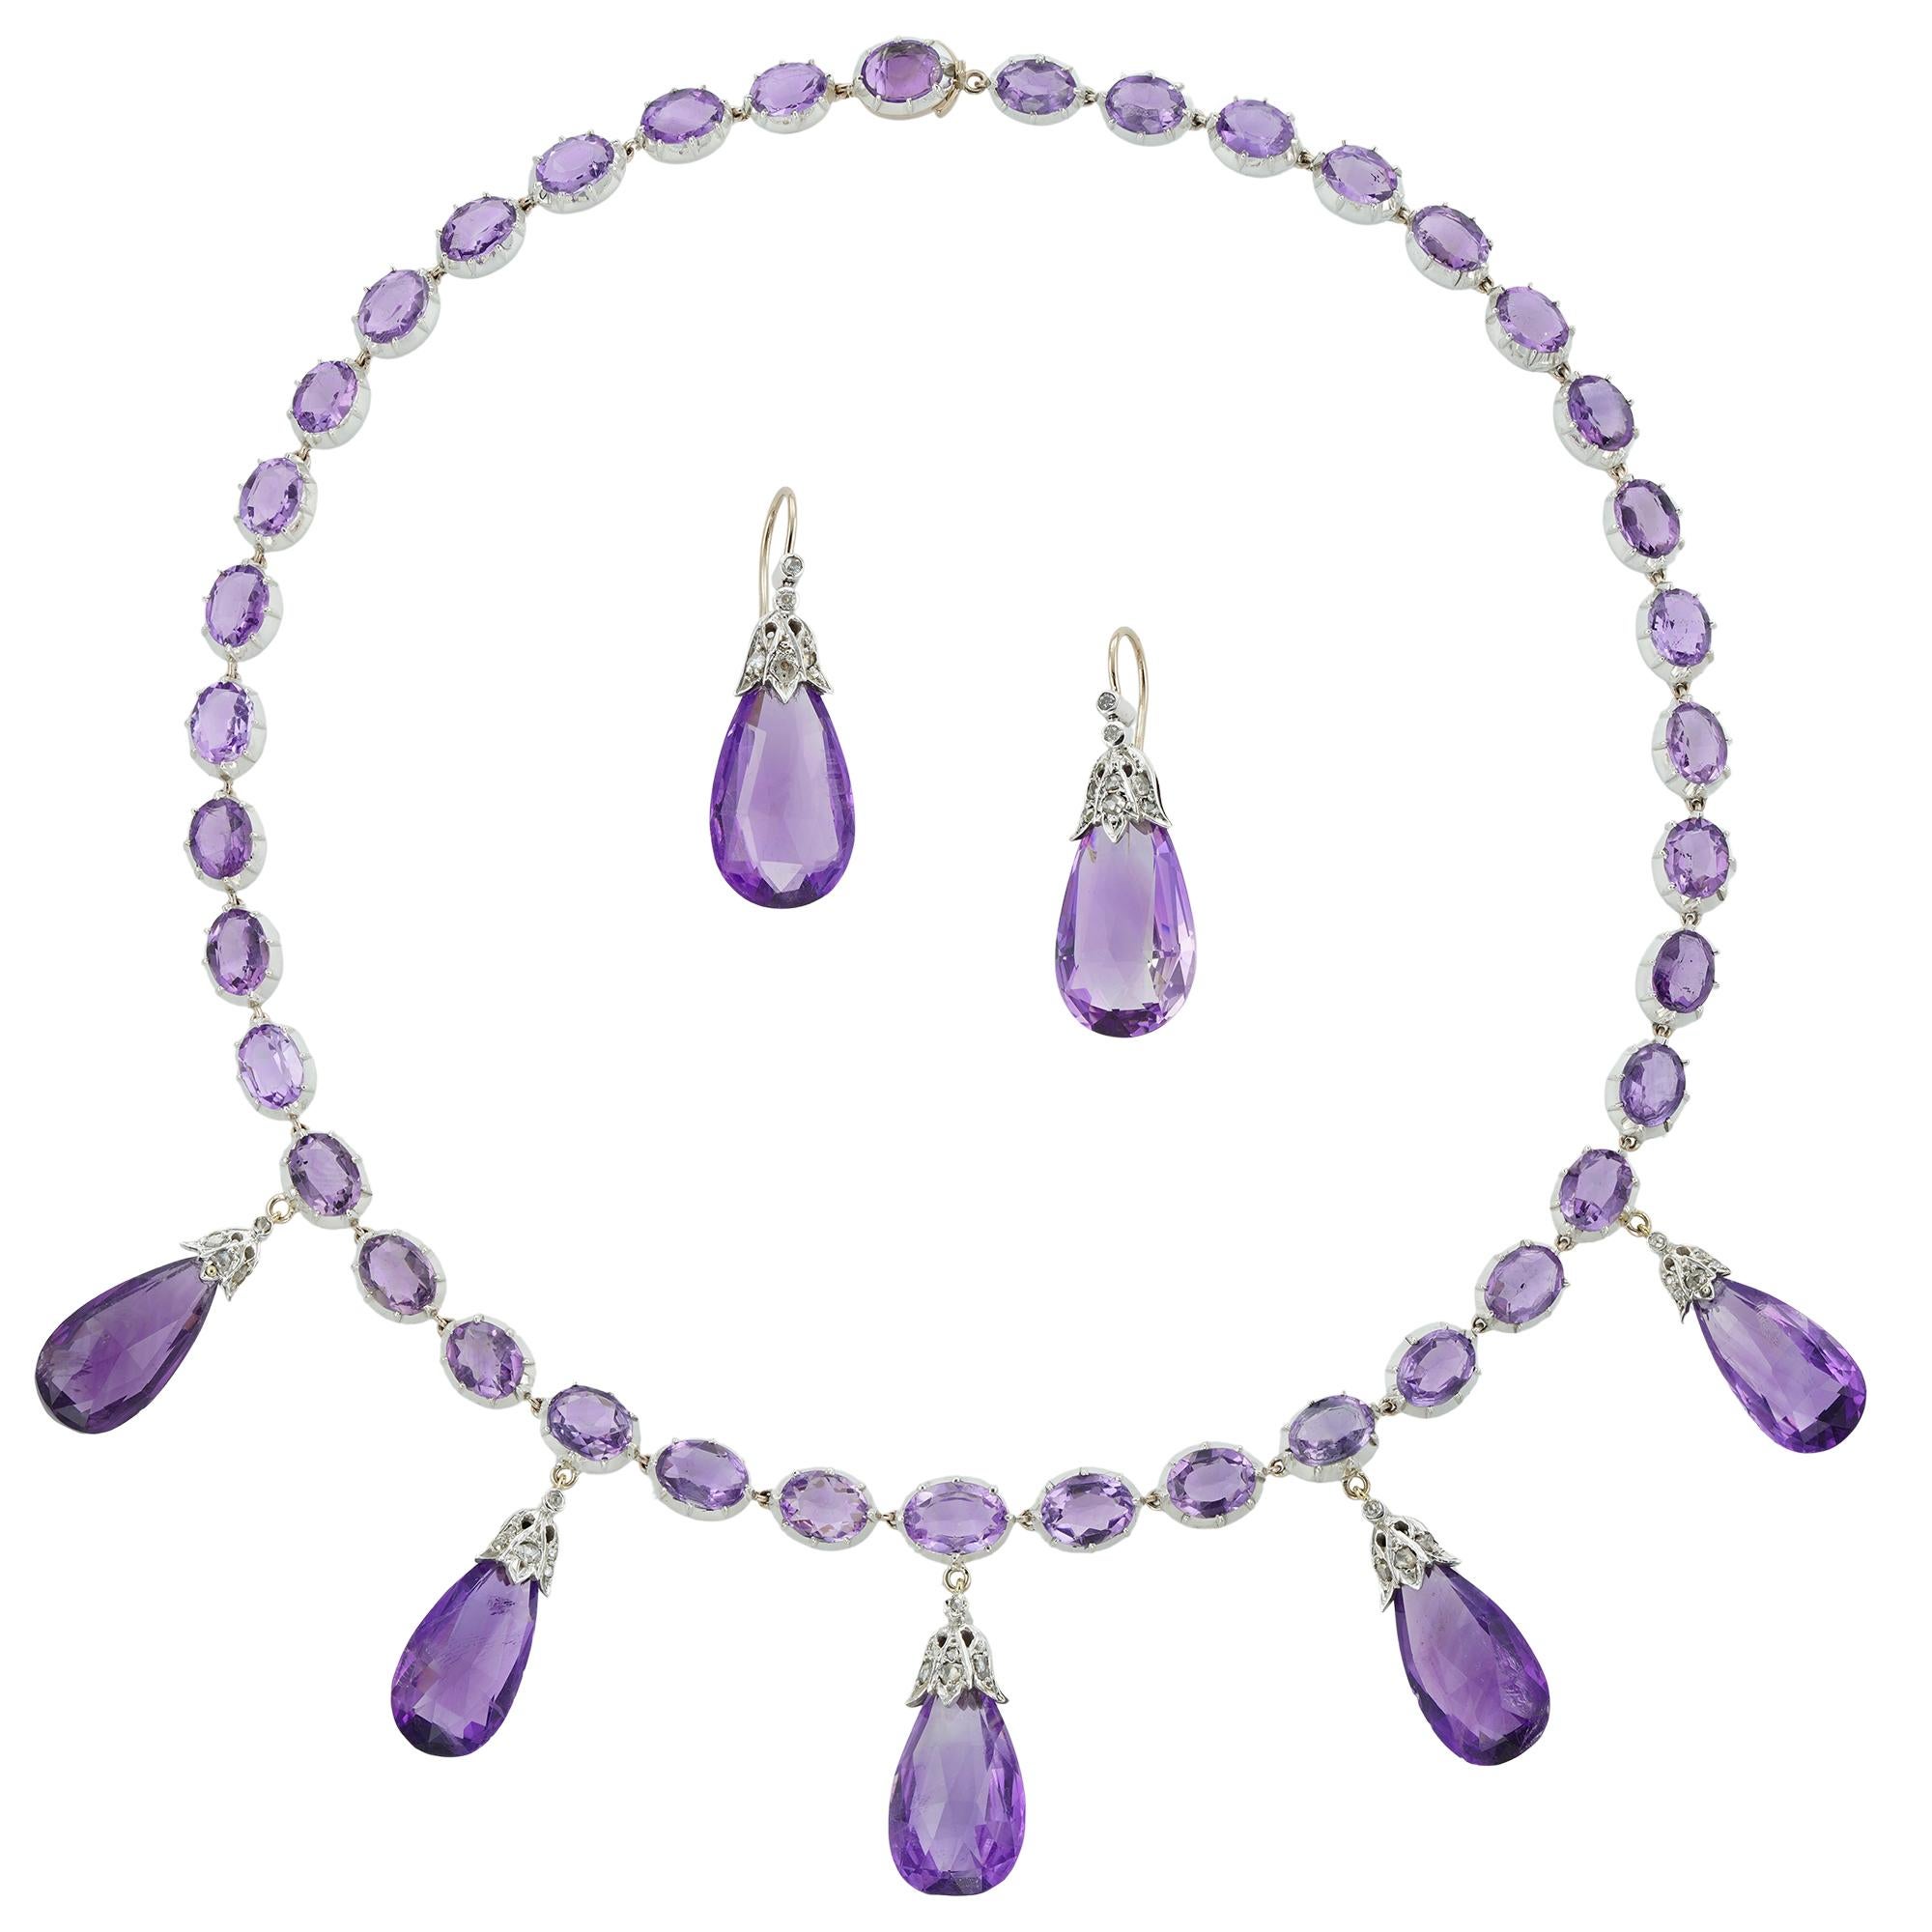 A late Victorian amethyst necklace and earrings, the necklace consisting of thirty-nine oval faceted amethyst, all set in cut-down collets, suspending five pear-shaped briolette-cut amethyst drops each with diamond-set cap of foliate design, all